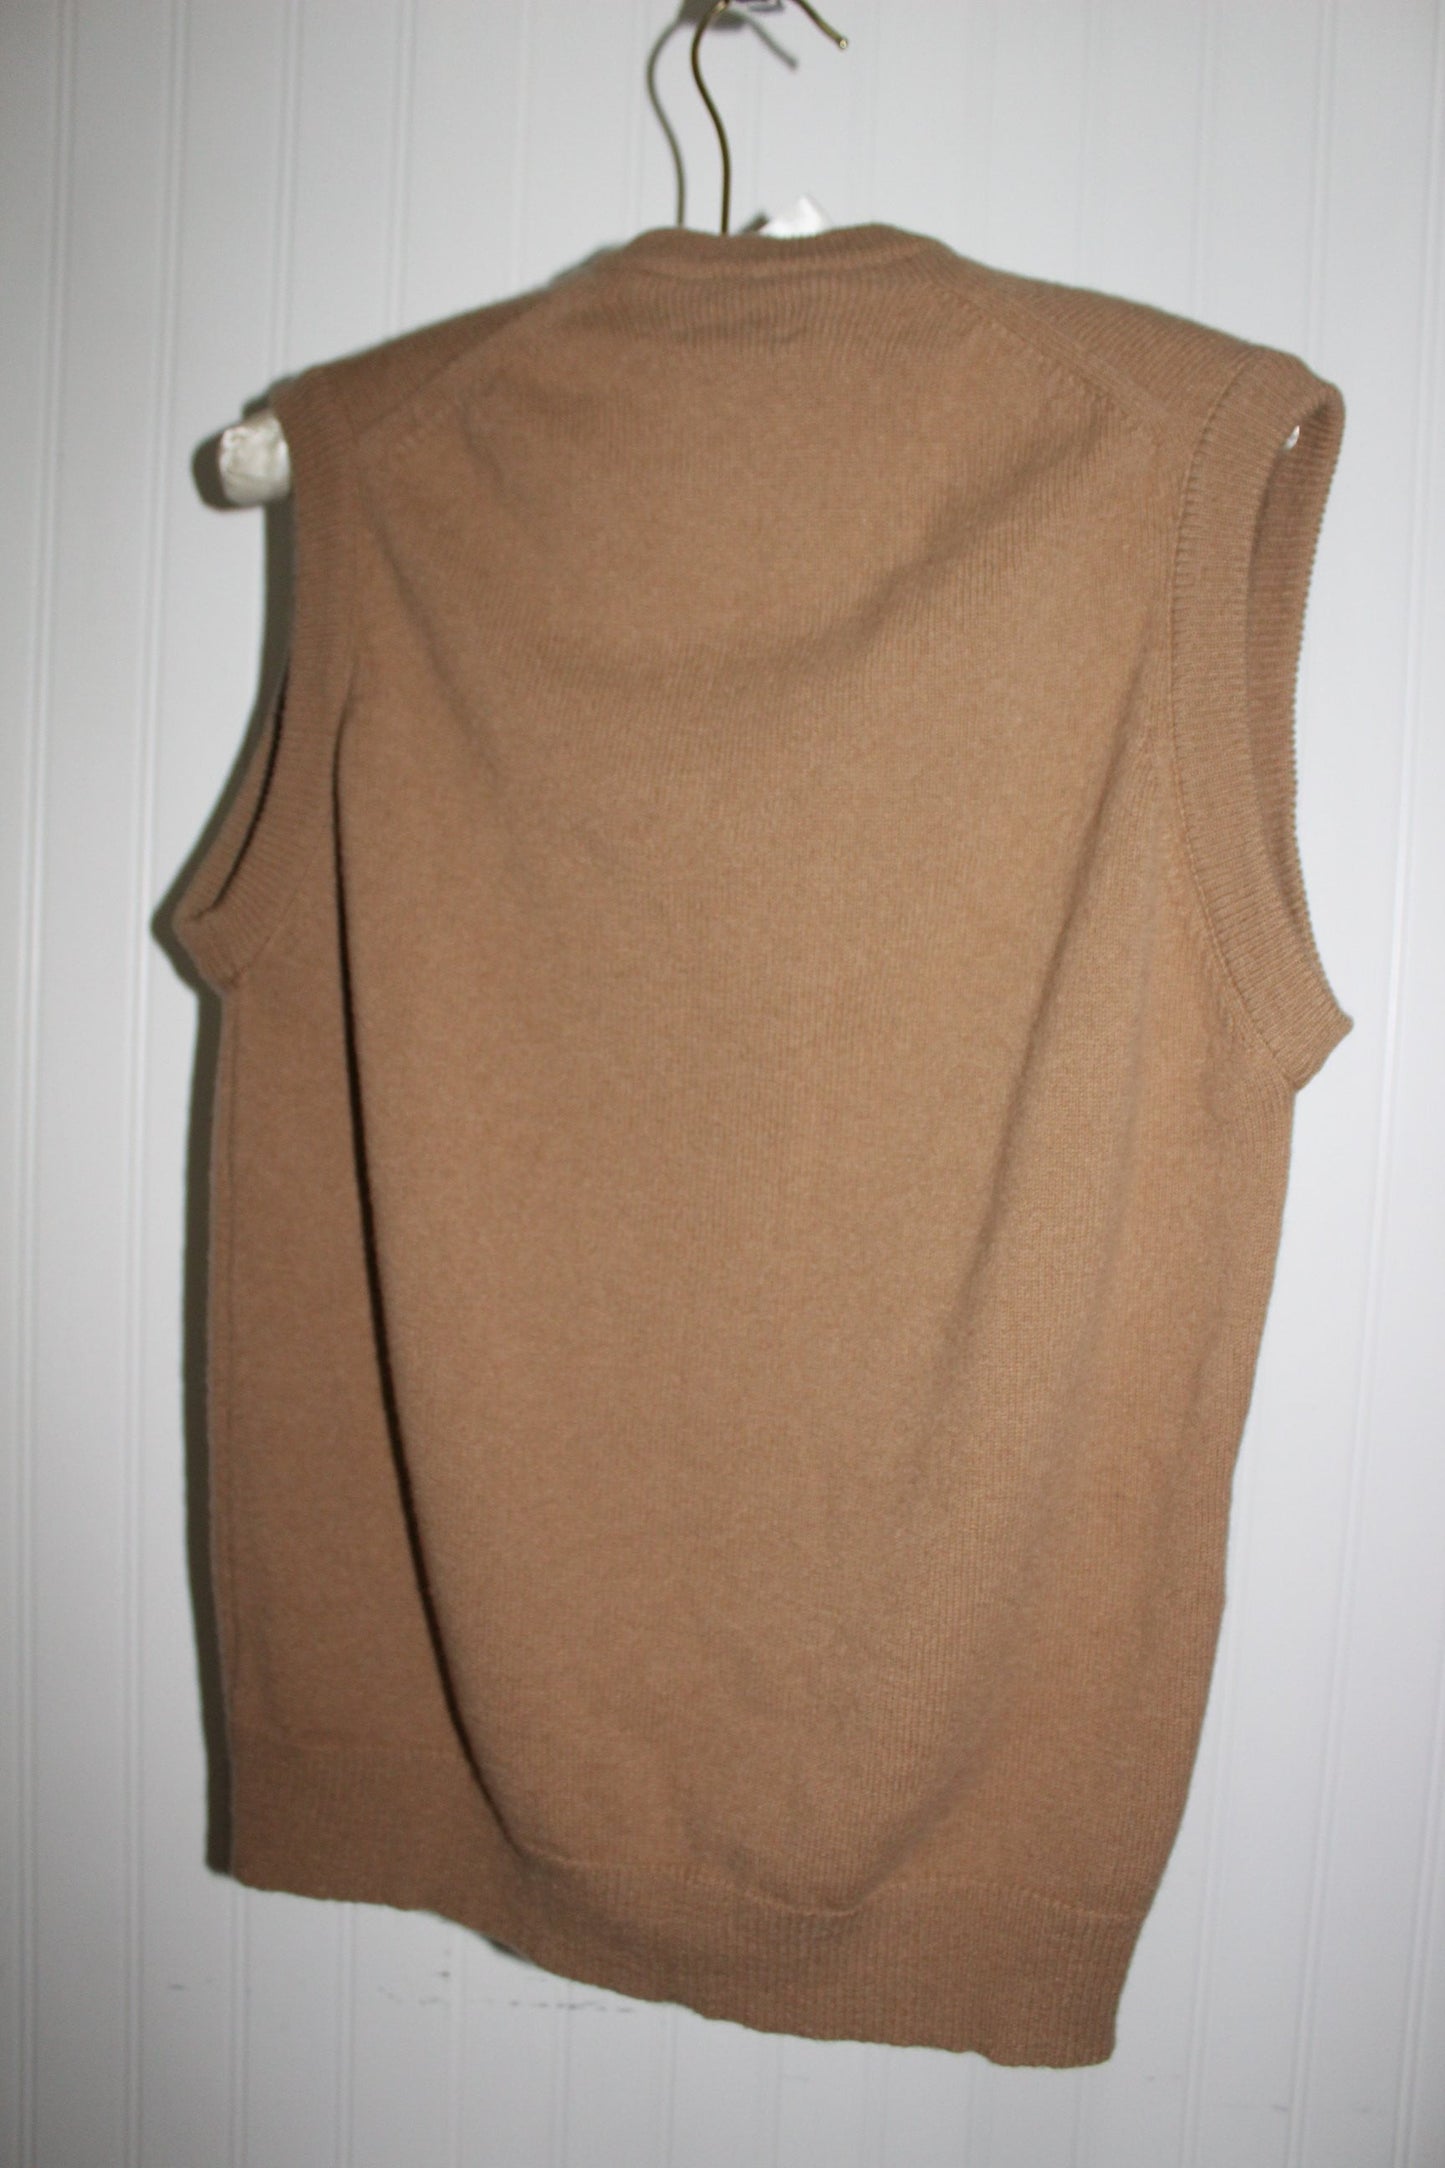 LL Bean Sleeveless Sweater Tan Pullover Lambswool Unisex neutral color